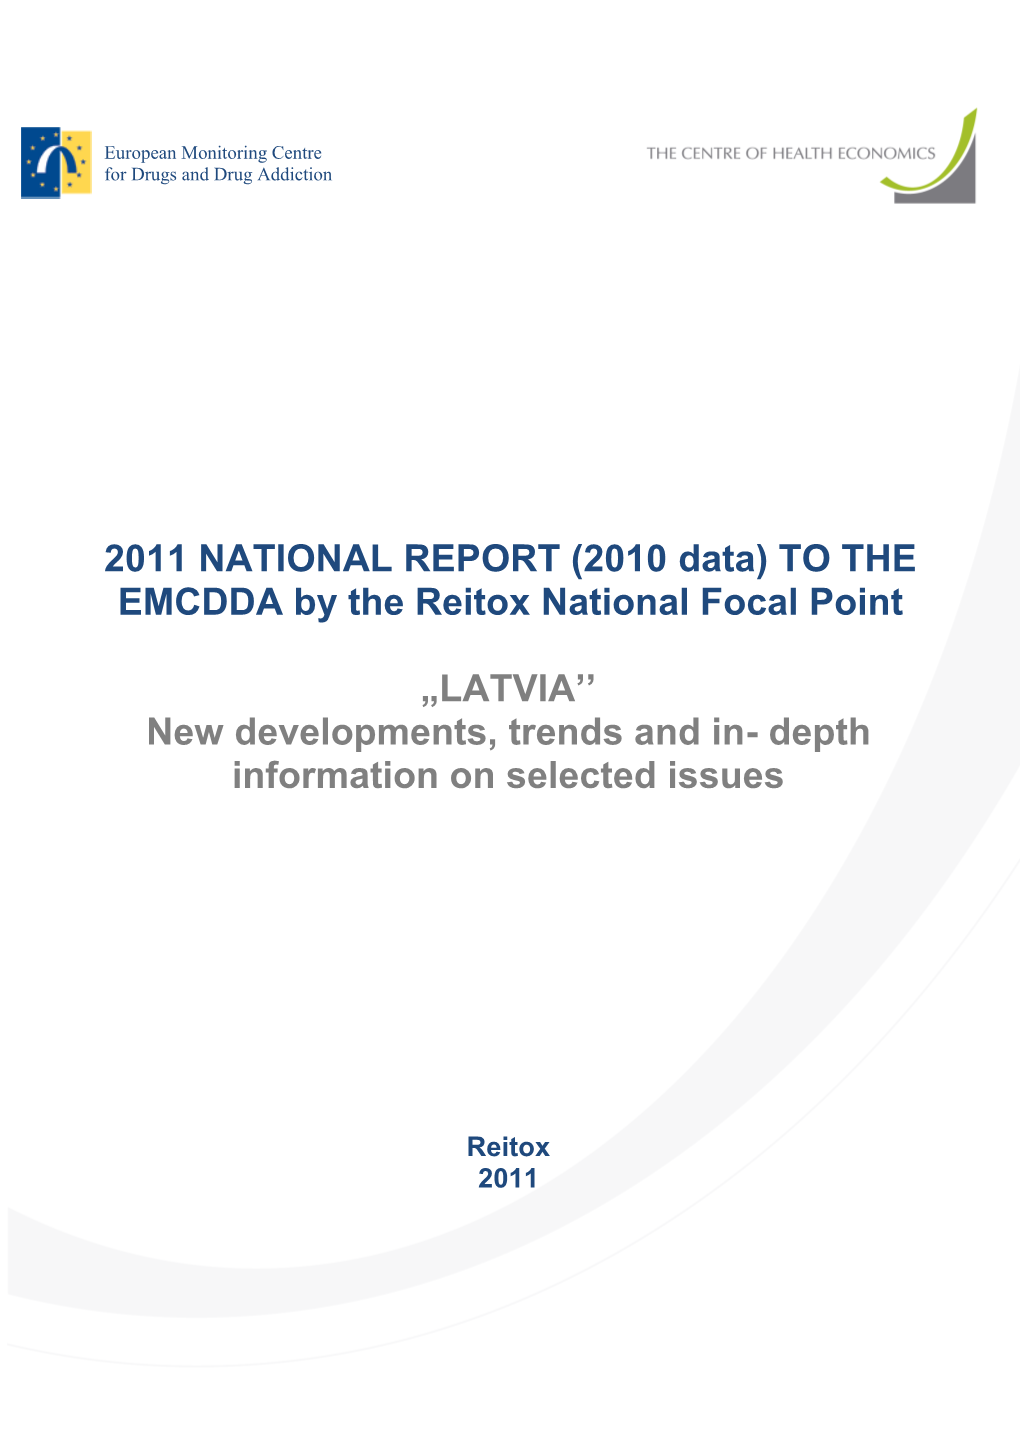 LATVIA’’ New Developments, Trends and In- Depth Information on Selected Issues